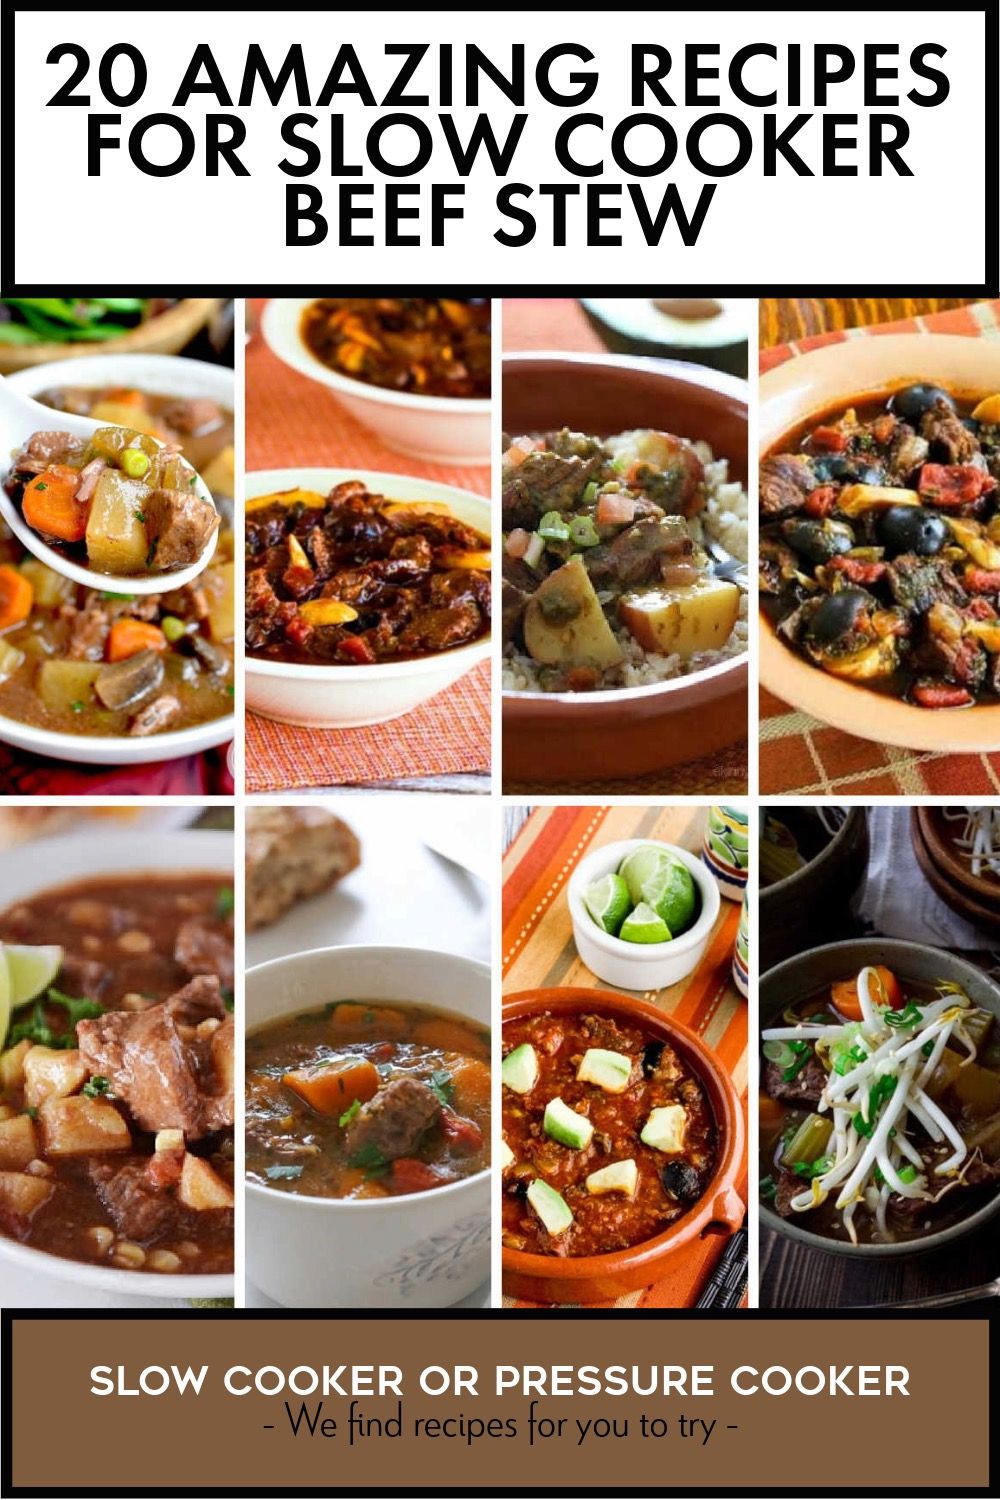 Pinterest image for 20 Slow Cooker Beef Stew Recipes showing featured recipes.